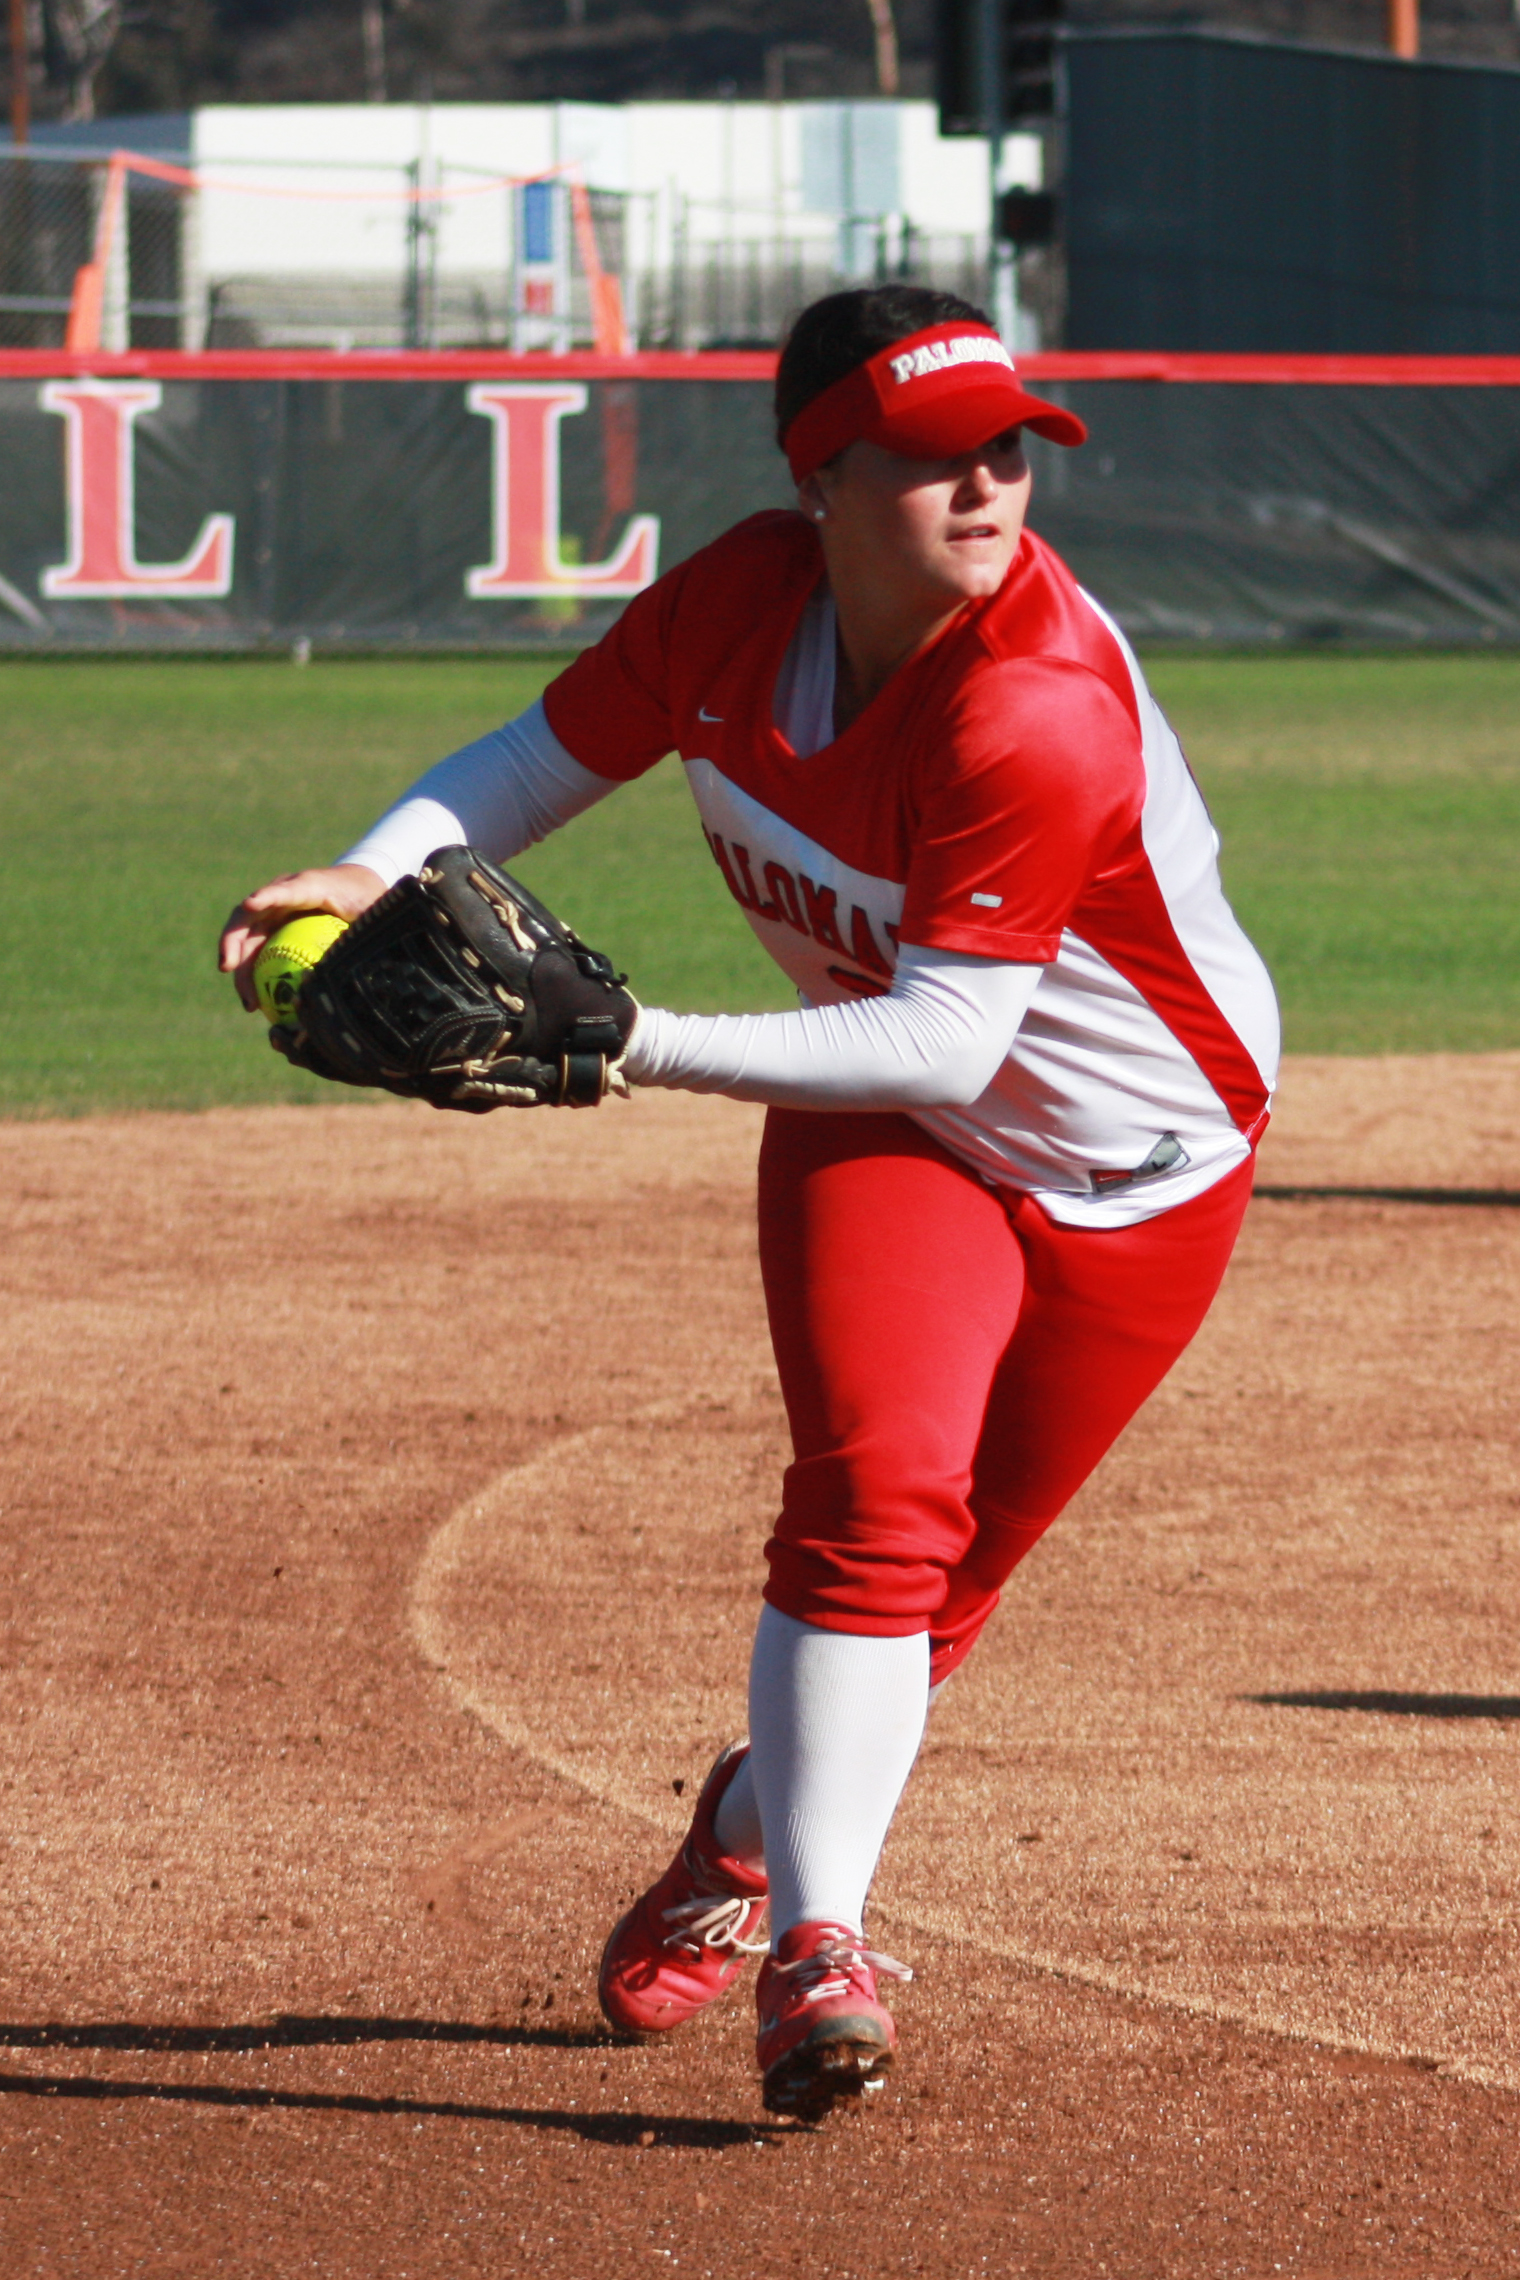 Palomar shortstop Kali Pugh gets the force out at third base to end the first inning against Citrus College on Feb 25 at Palomarâs softball field. The Comets picked up their 8th win in a row to improve their record to 9-1 on the season in their 4-1 win over the Owls. Scott Colson/The Telescope